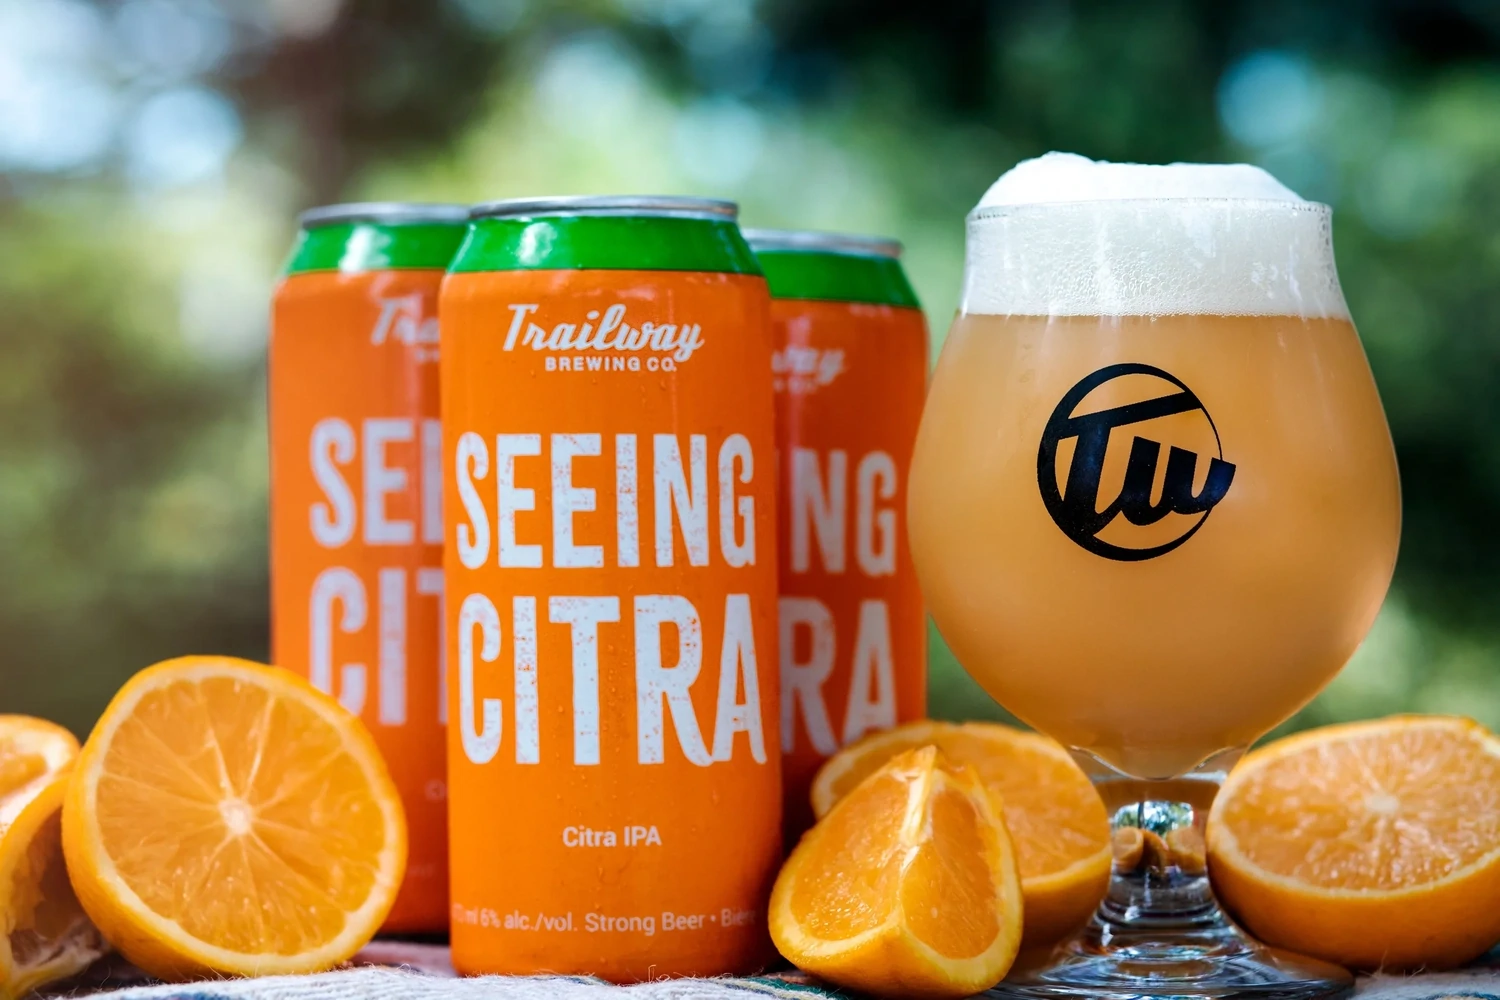 Trailway-Seeing Citra